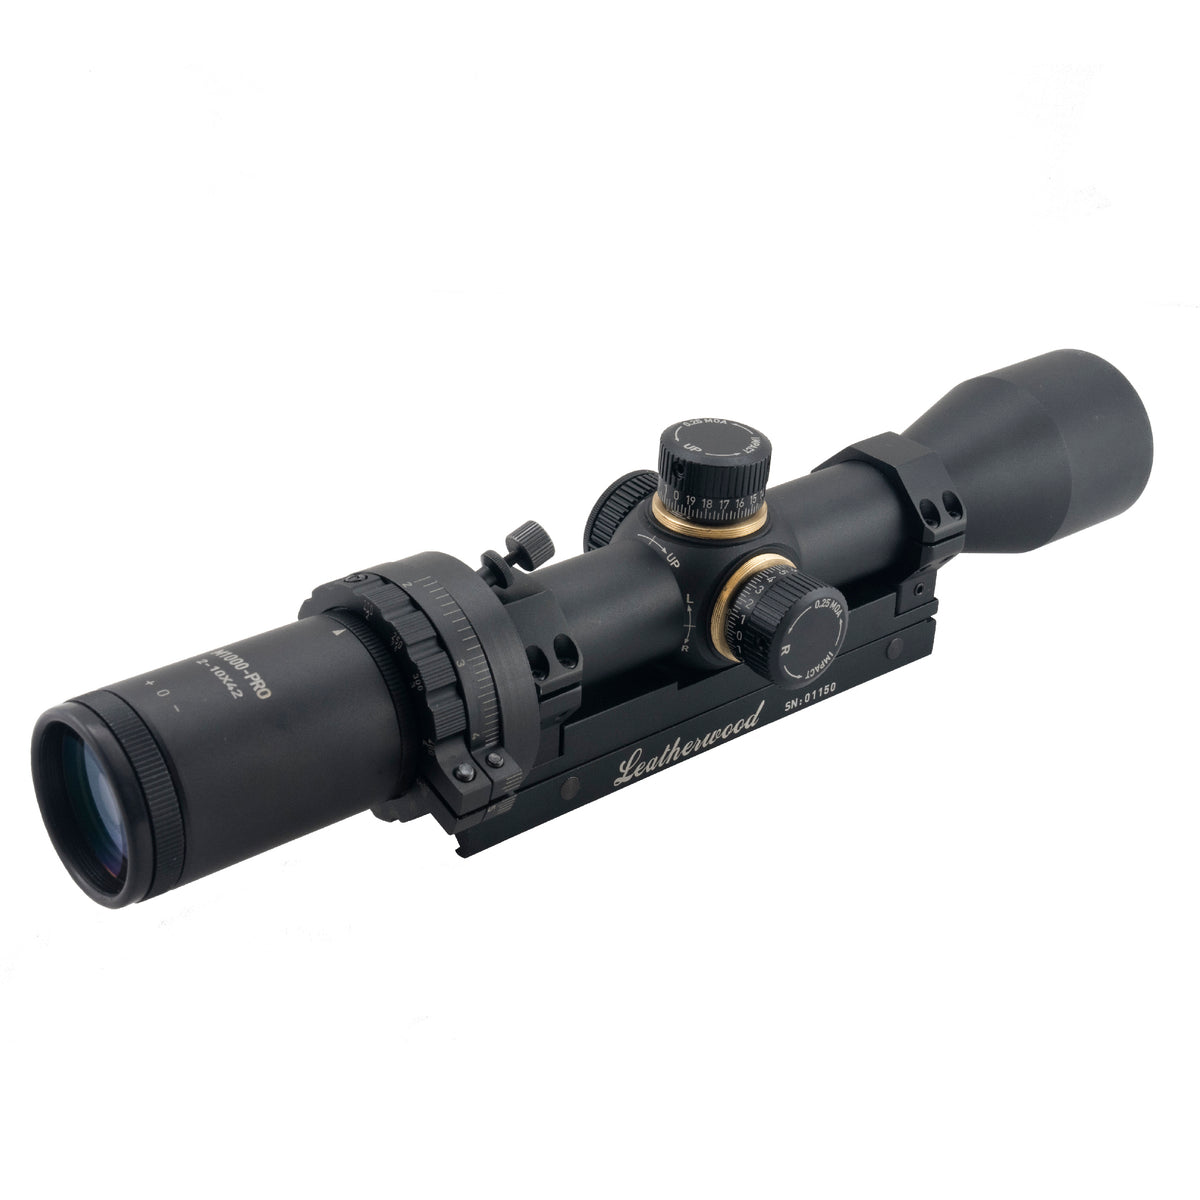 Scope with uncapped adjustments